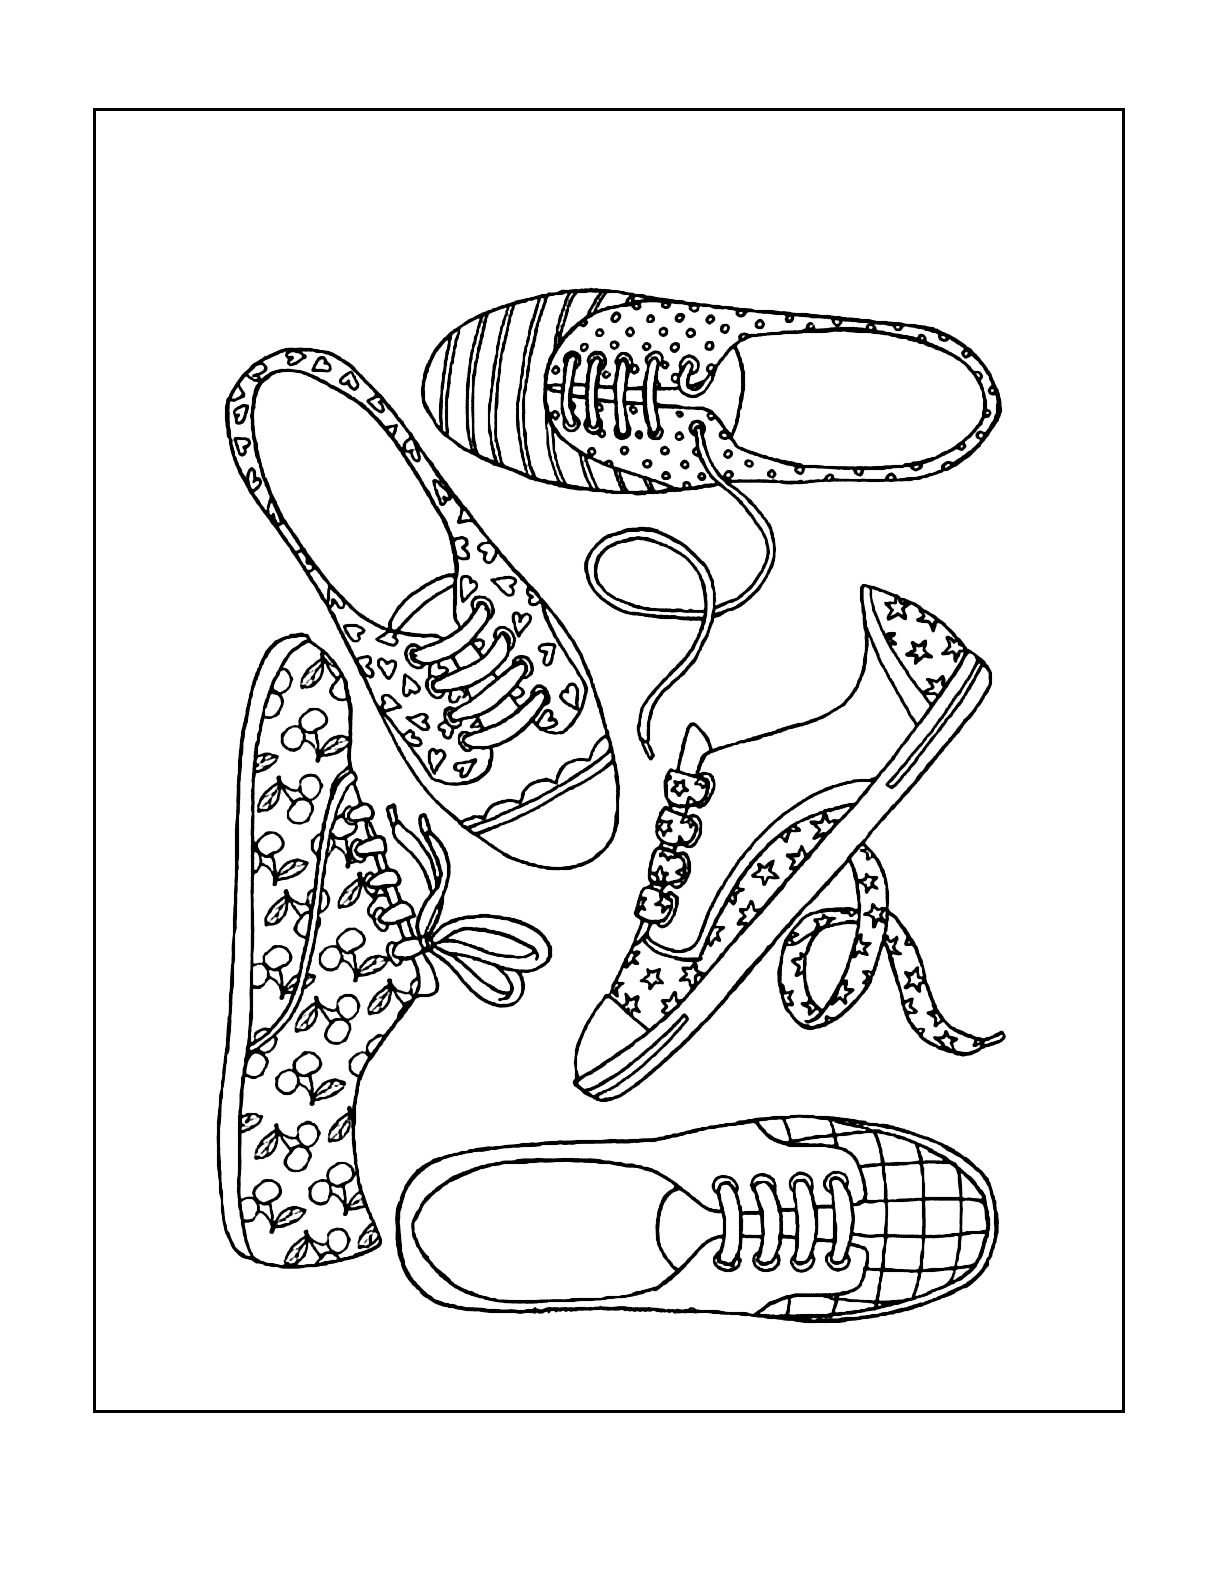 Fun Assortment Of Shoes Coloring Page